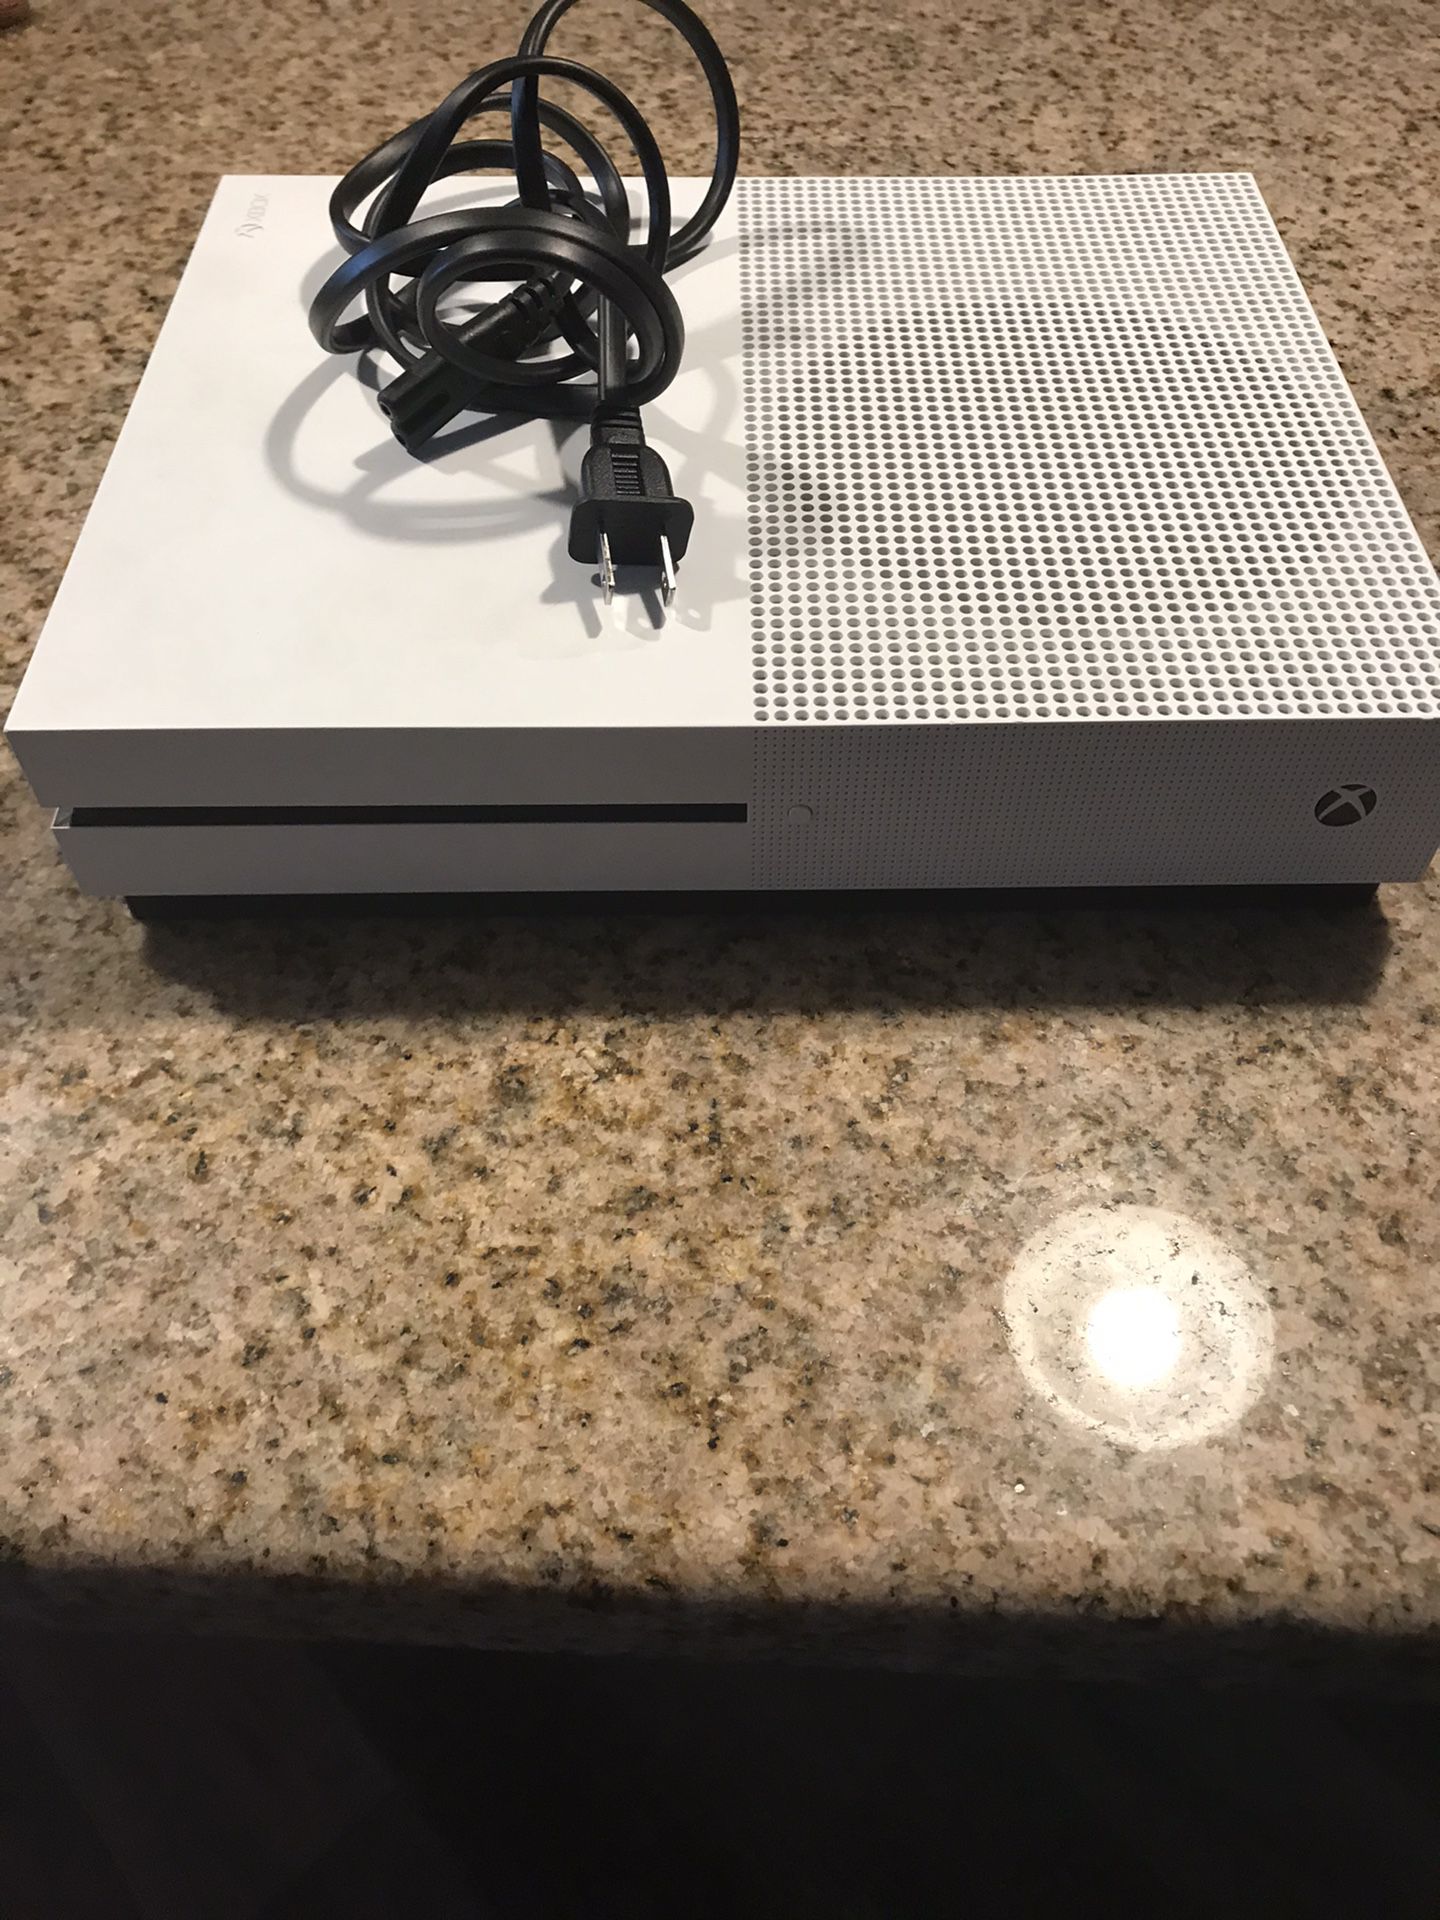 Xbox One S 500 GB Minecraft Bundle (With Controller) Good condition comes with power cable and hdmi